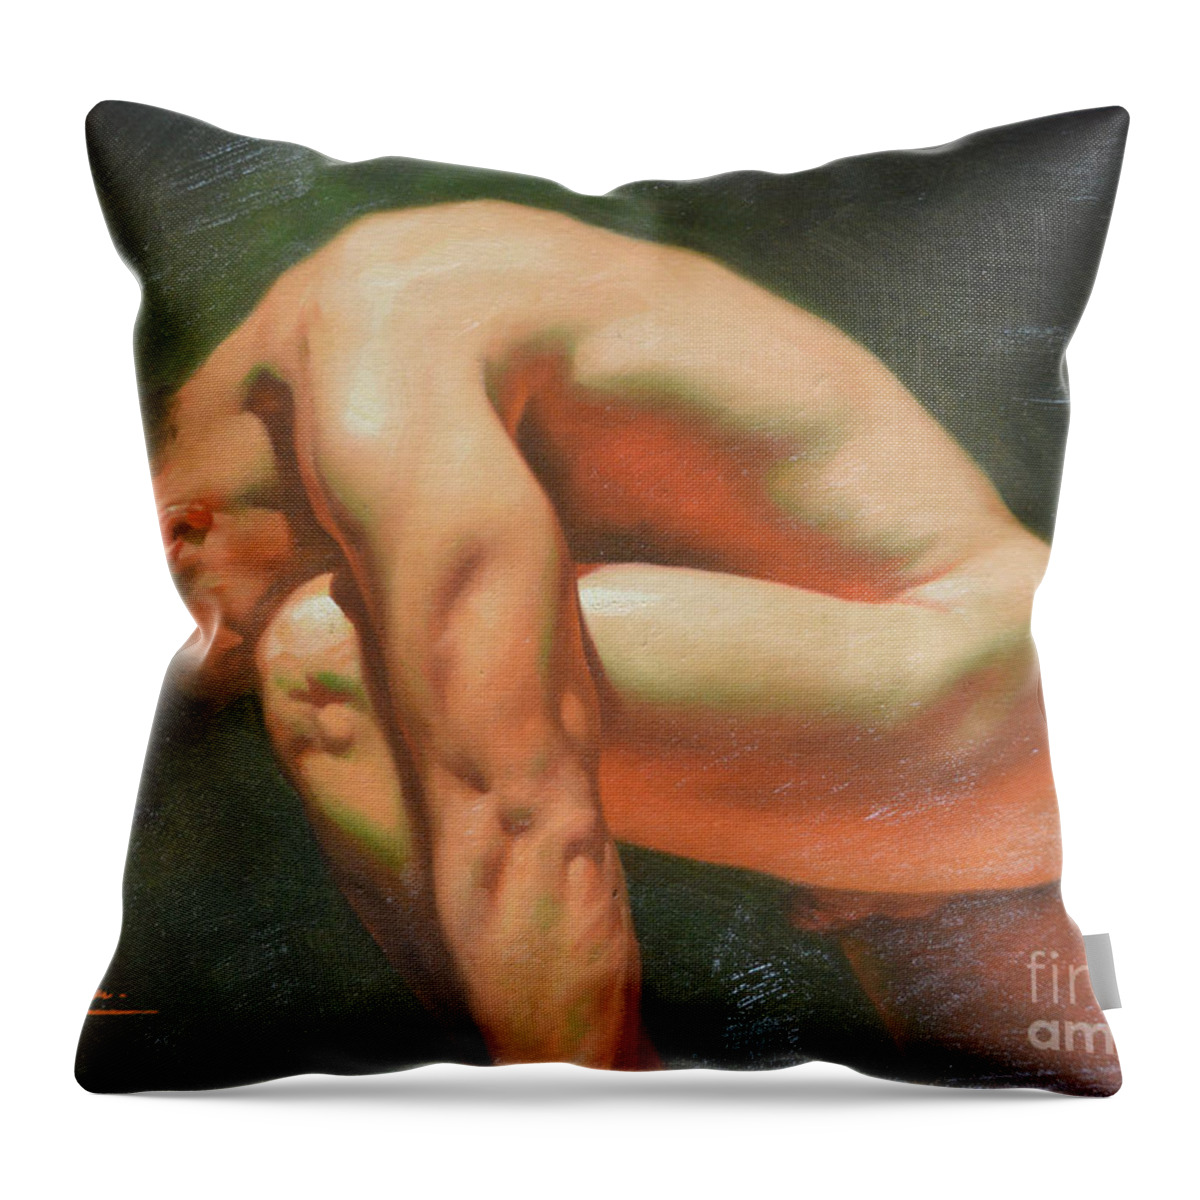 Original Oil Painting Throw Pillow featuring the painting Original classic oil painting man body art-male nude -042 by Hongtao Huang